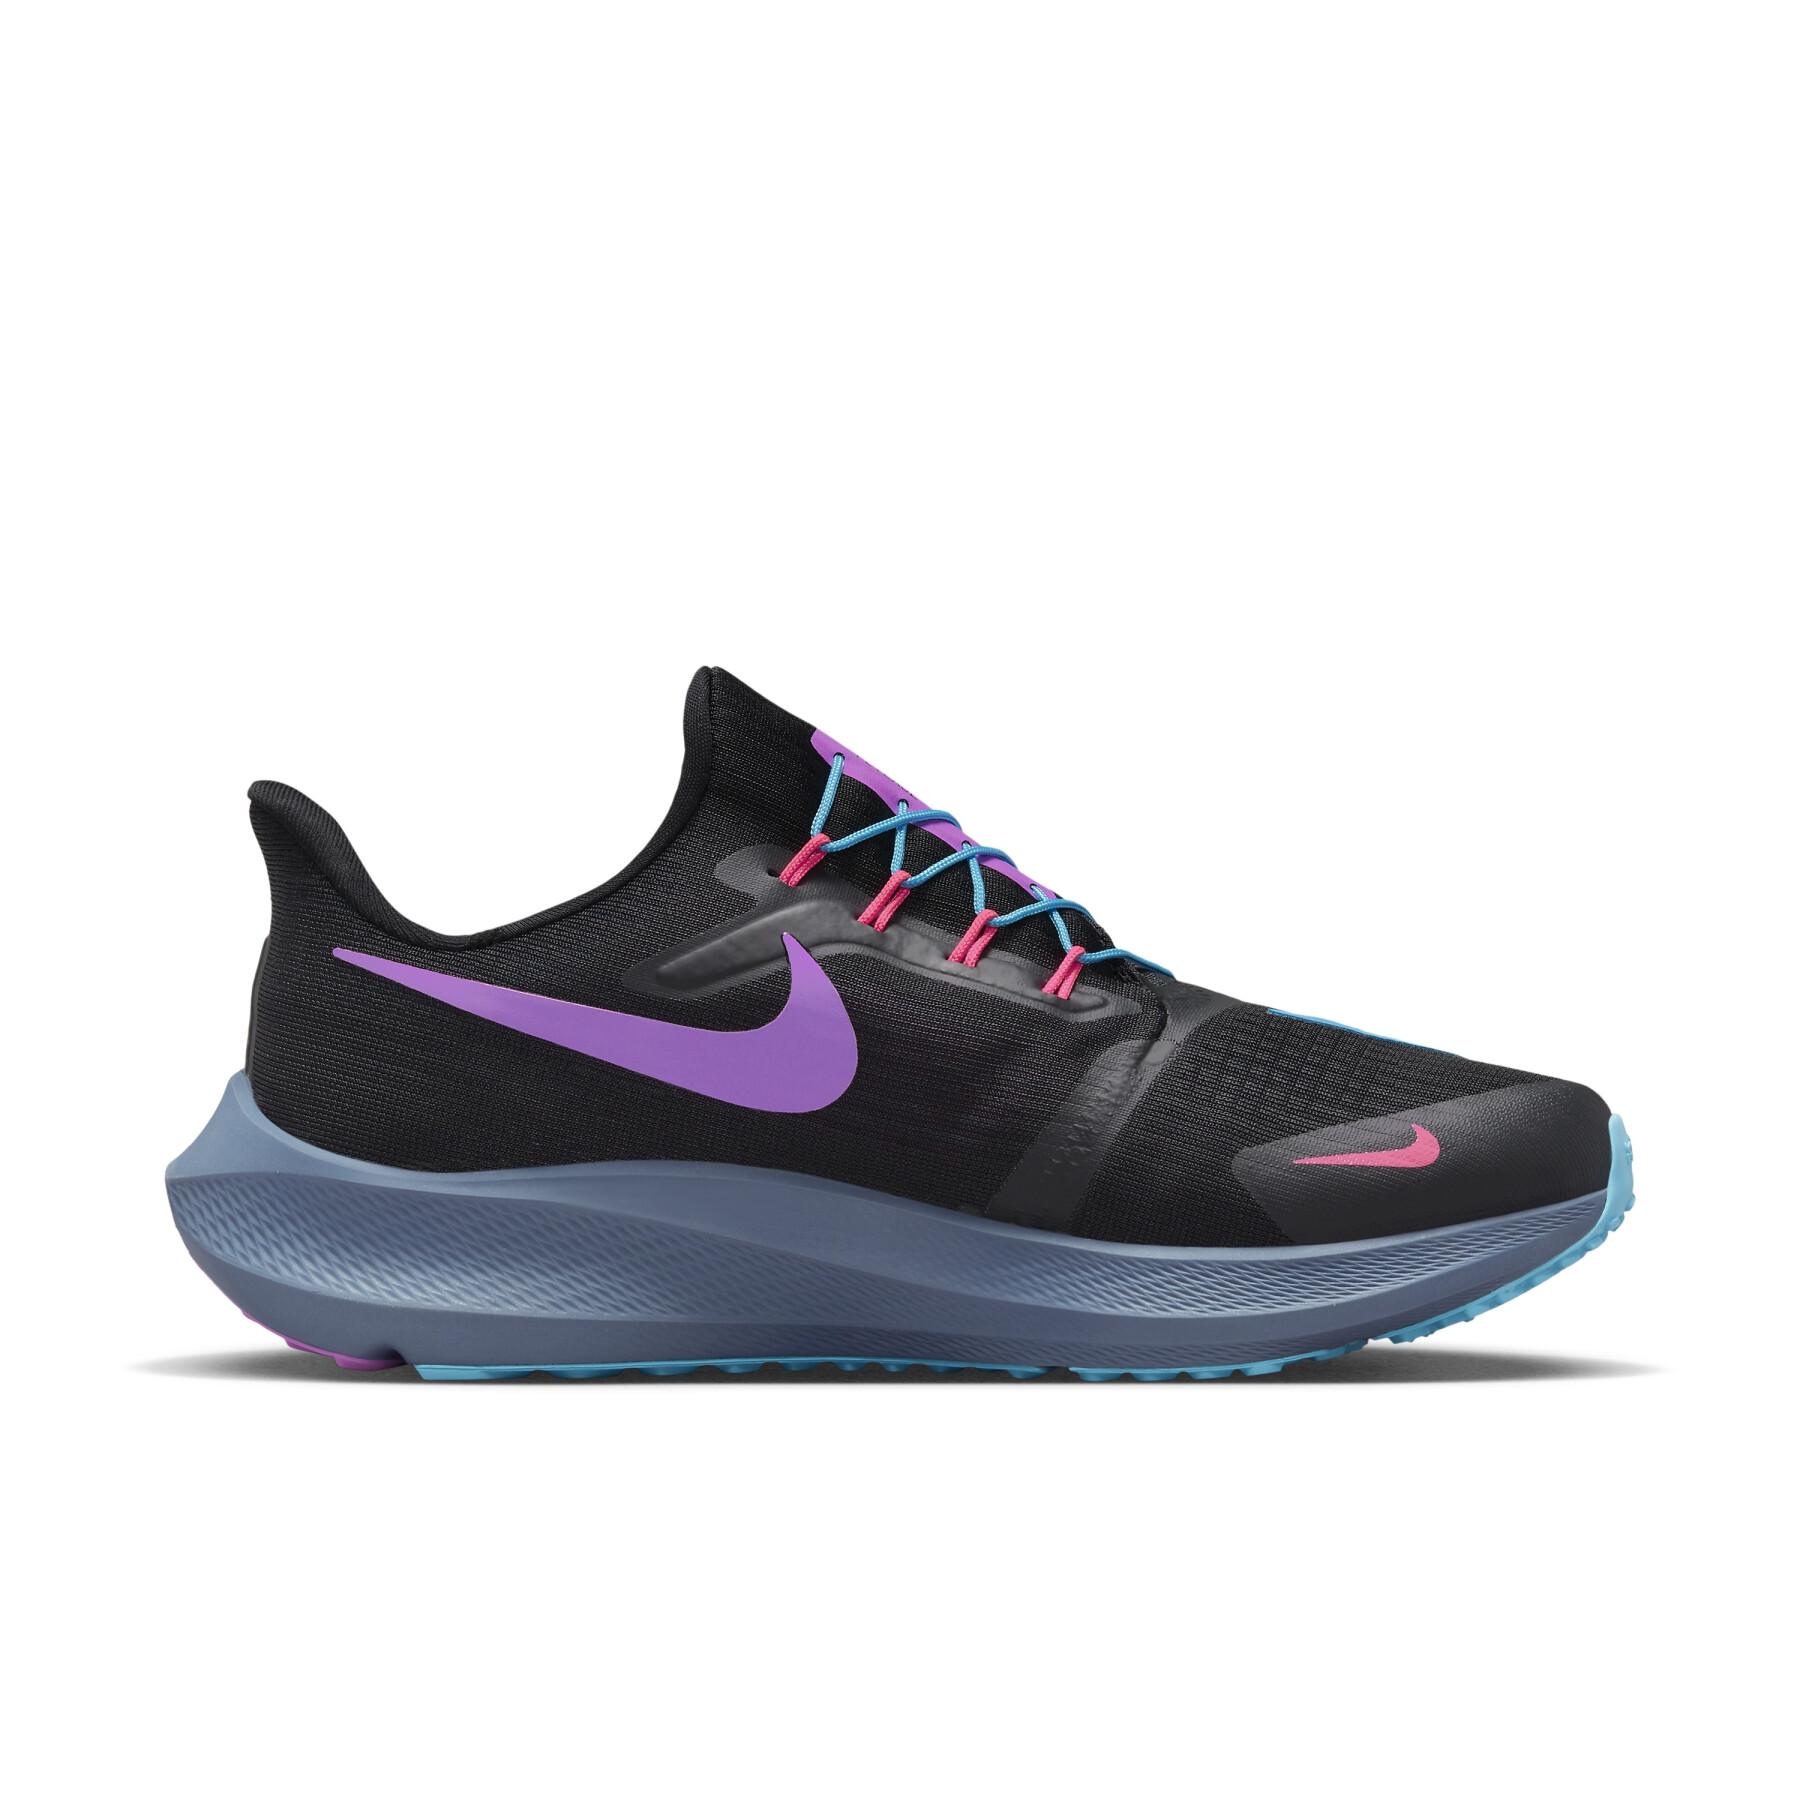 Taxi fuerte homosexual Shoes from running femme Nike Pegasus Flyease SE - Nike - Shoes Running -  Running